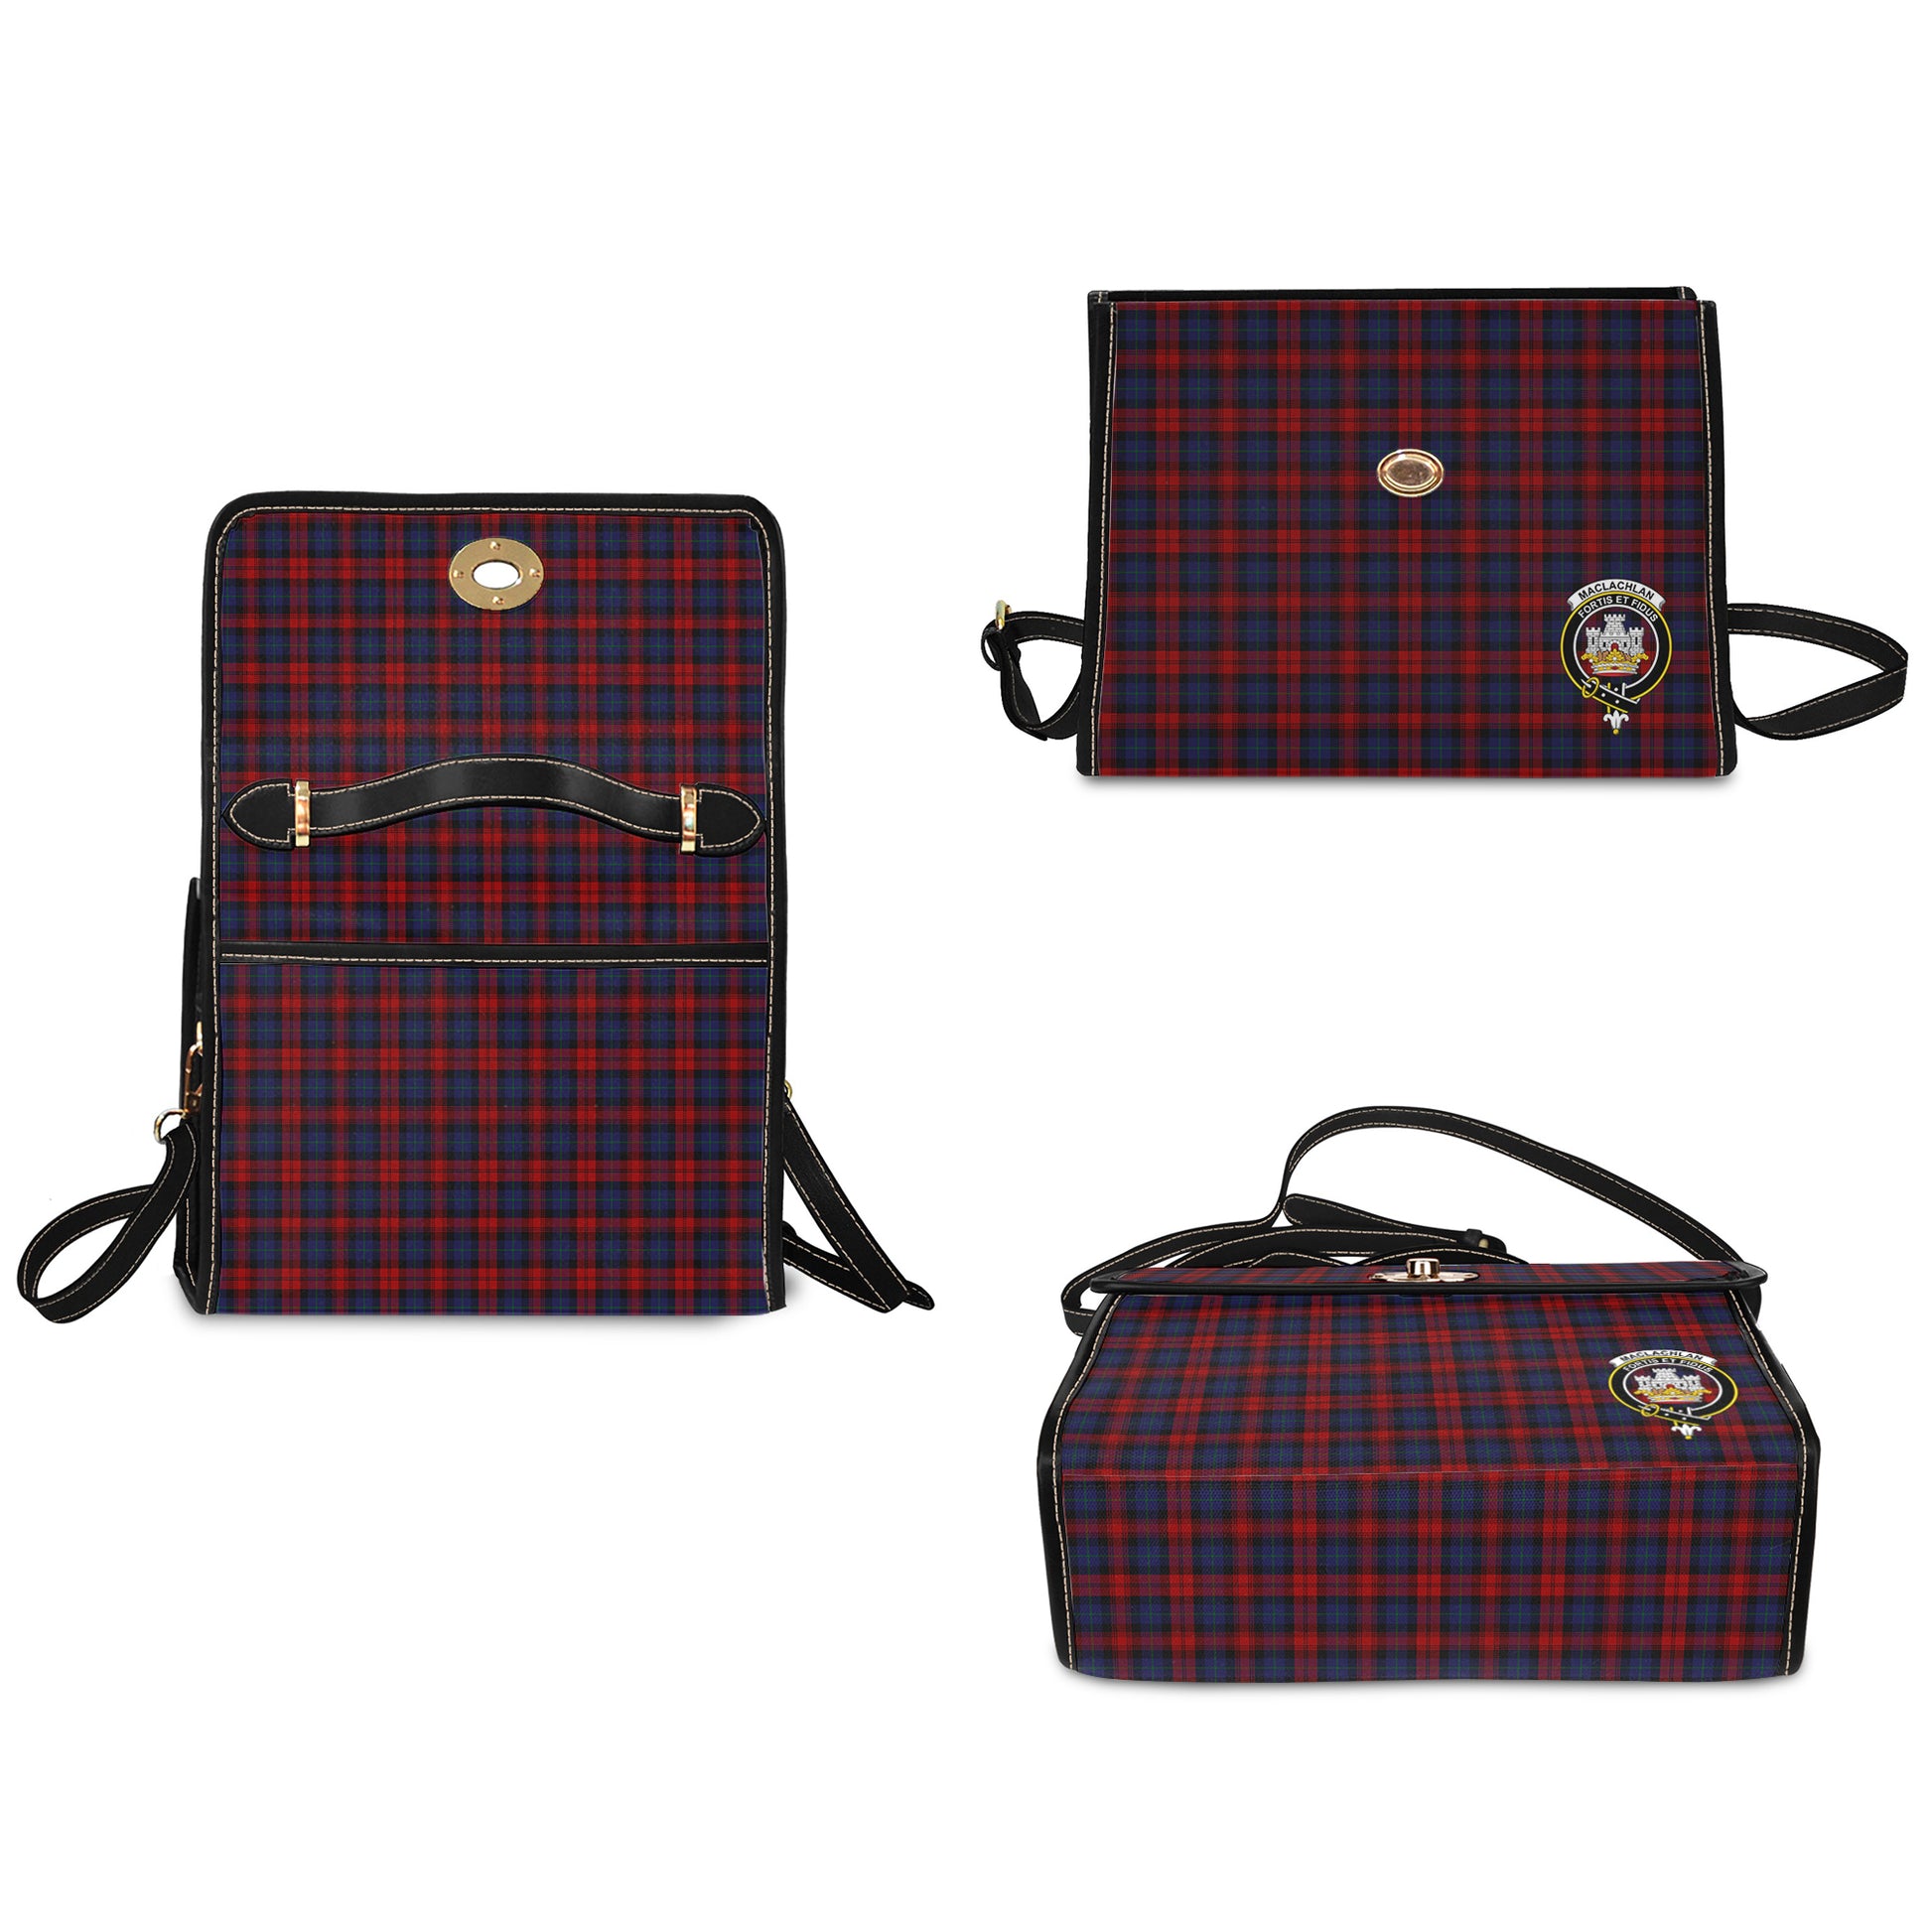 maclachlan-tartan-leather-strap-waterproof-canvas-bag-with-family-crest